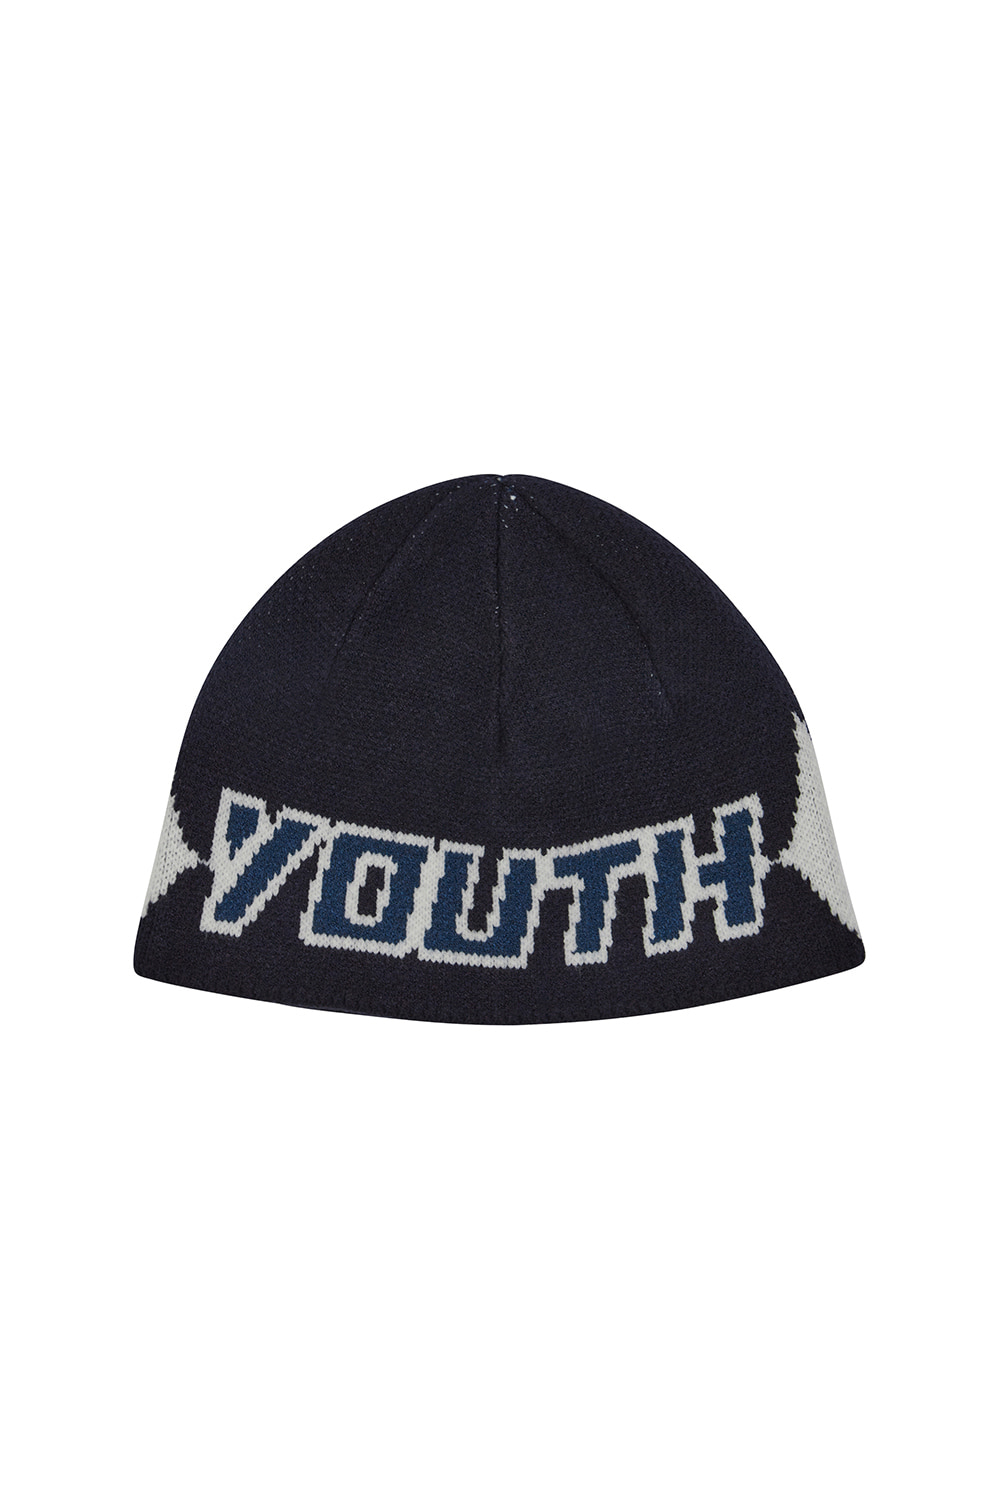 YOUTH IS YOURS